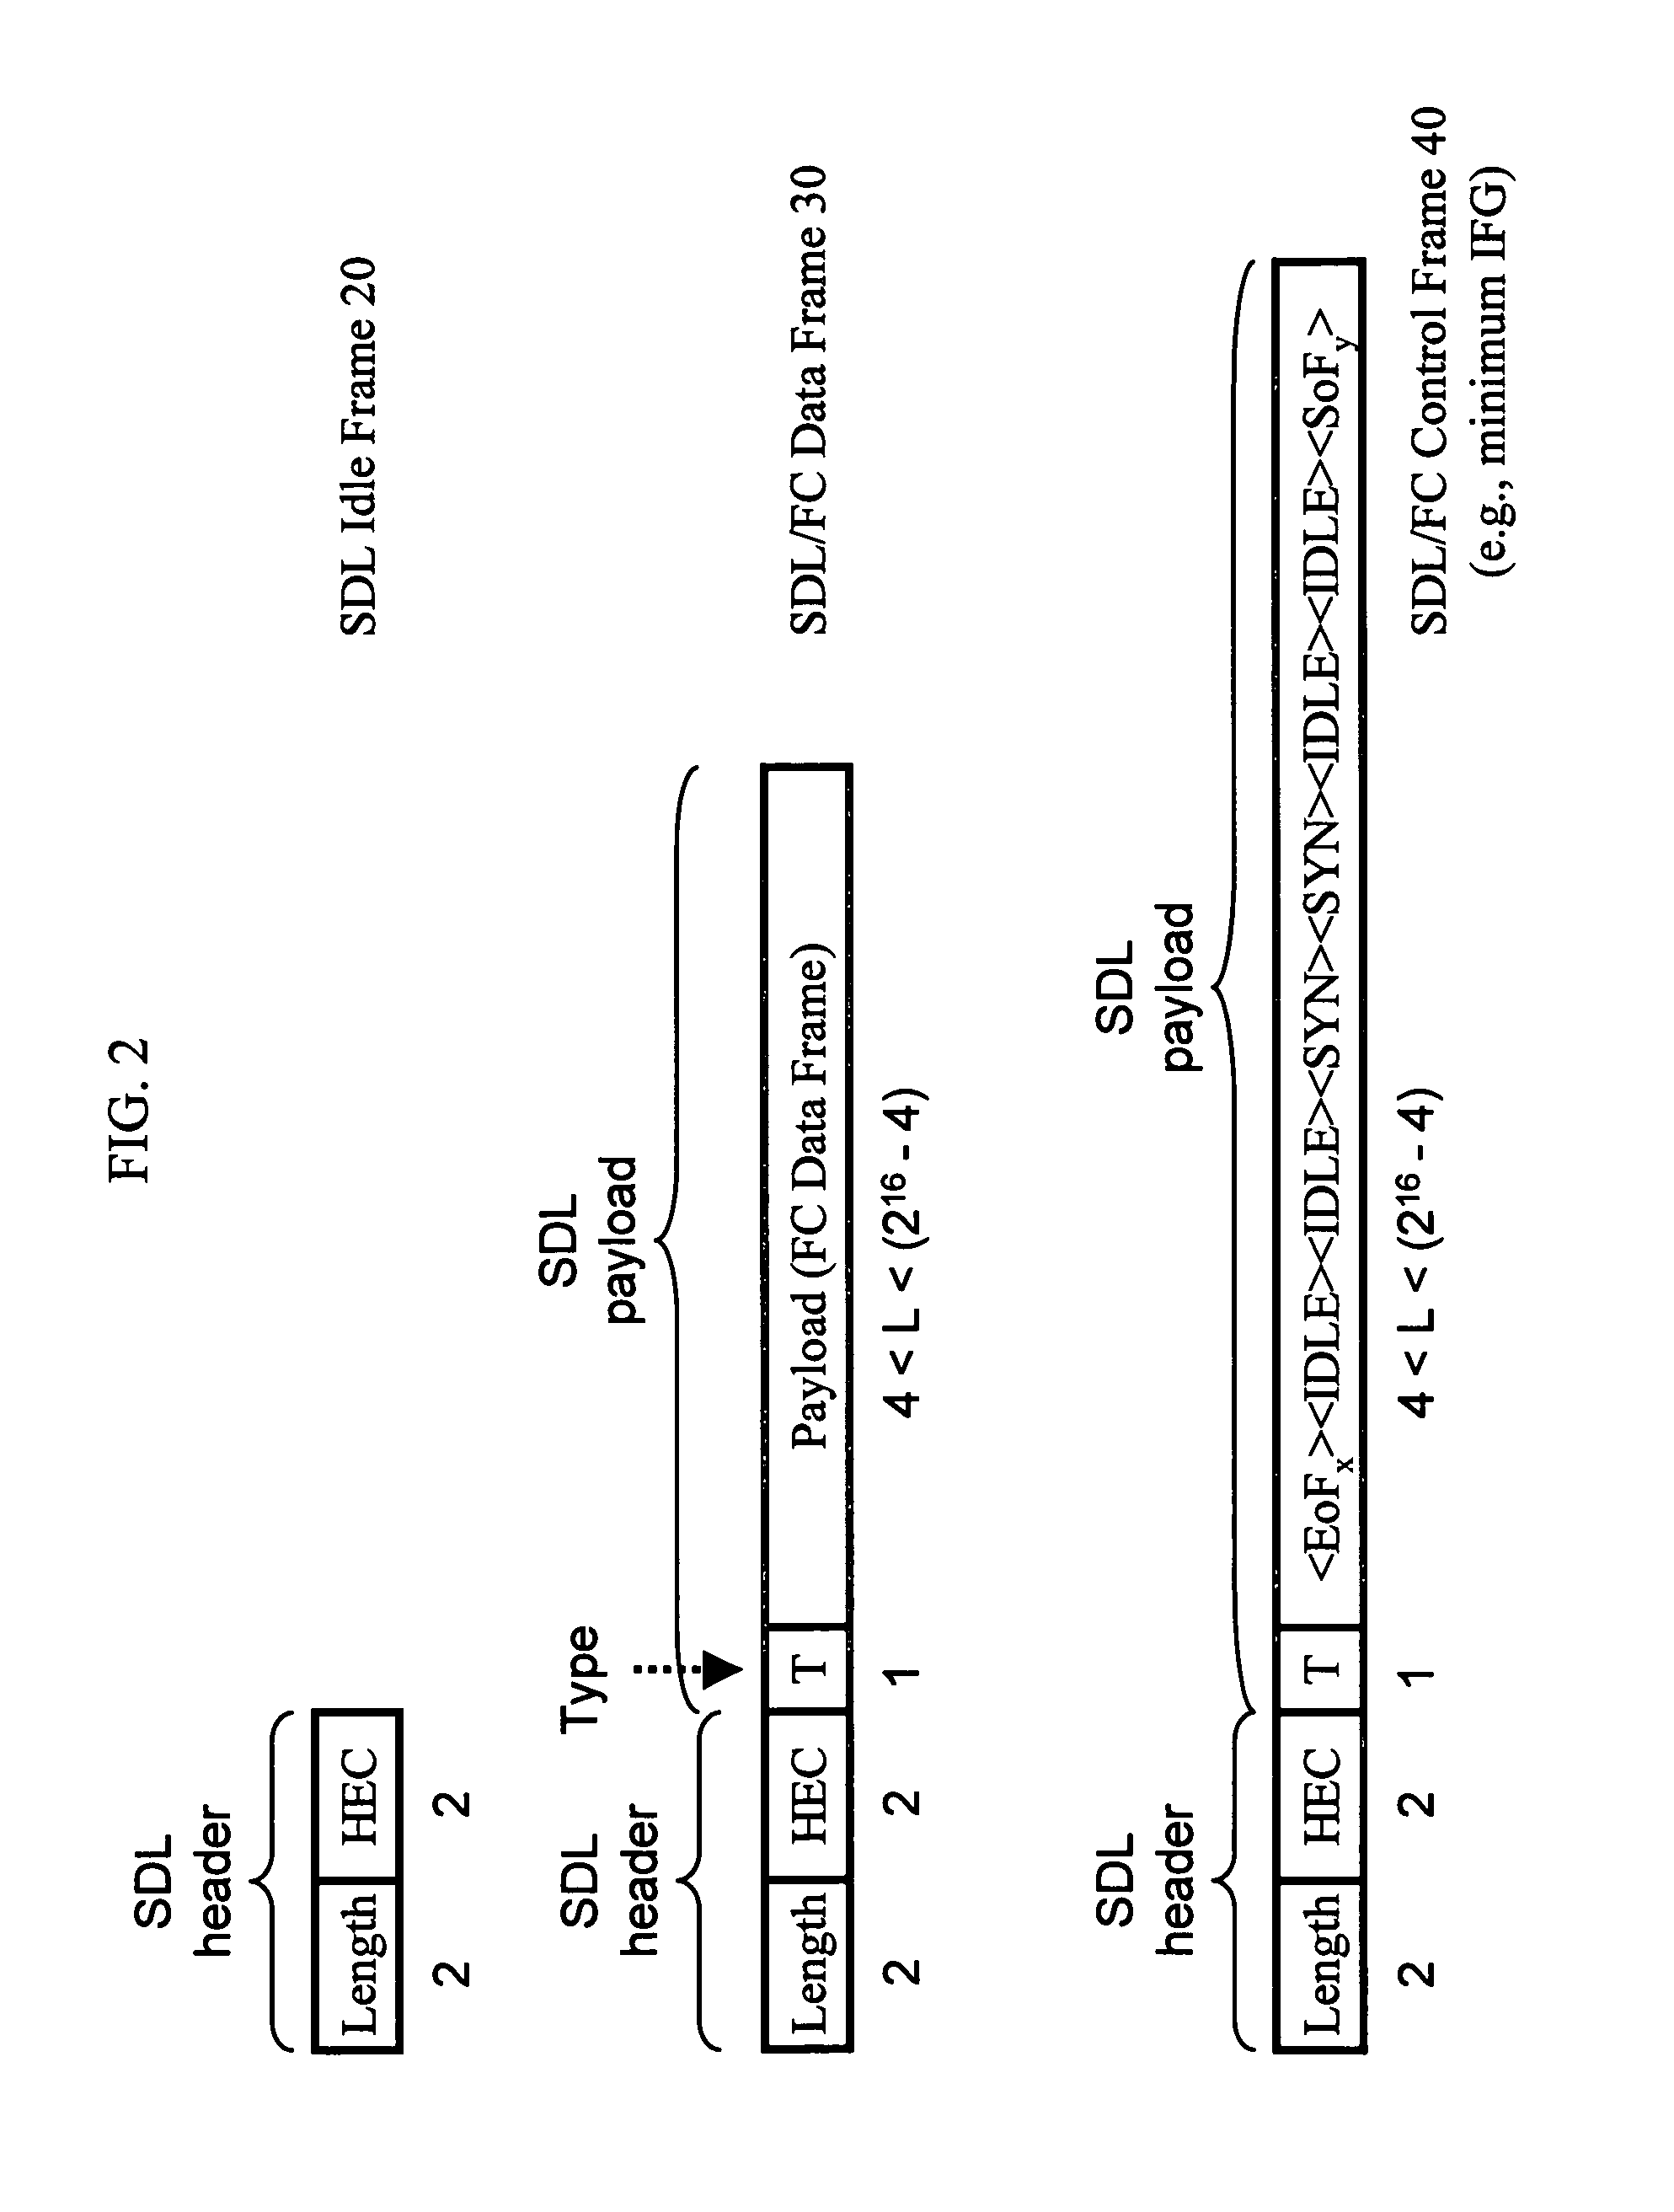 Mapping of block-encoded data formats onto a bit/byte synchronous transport medium